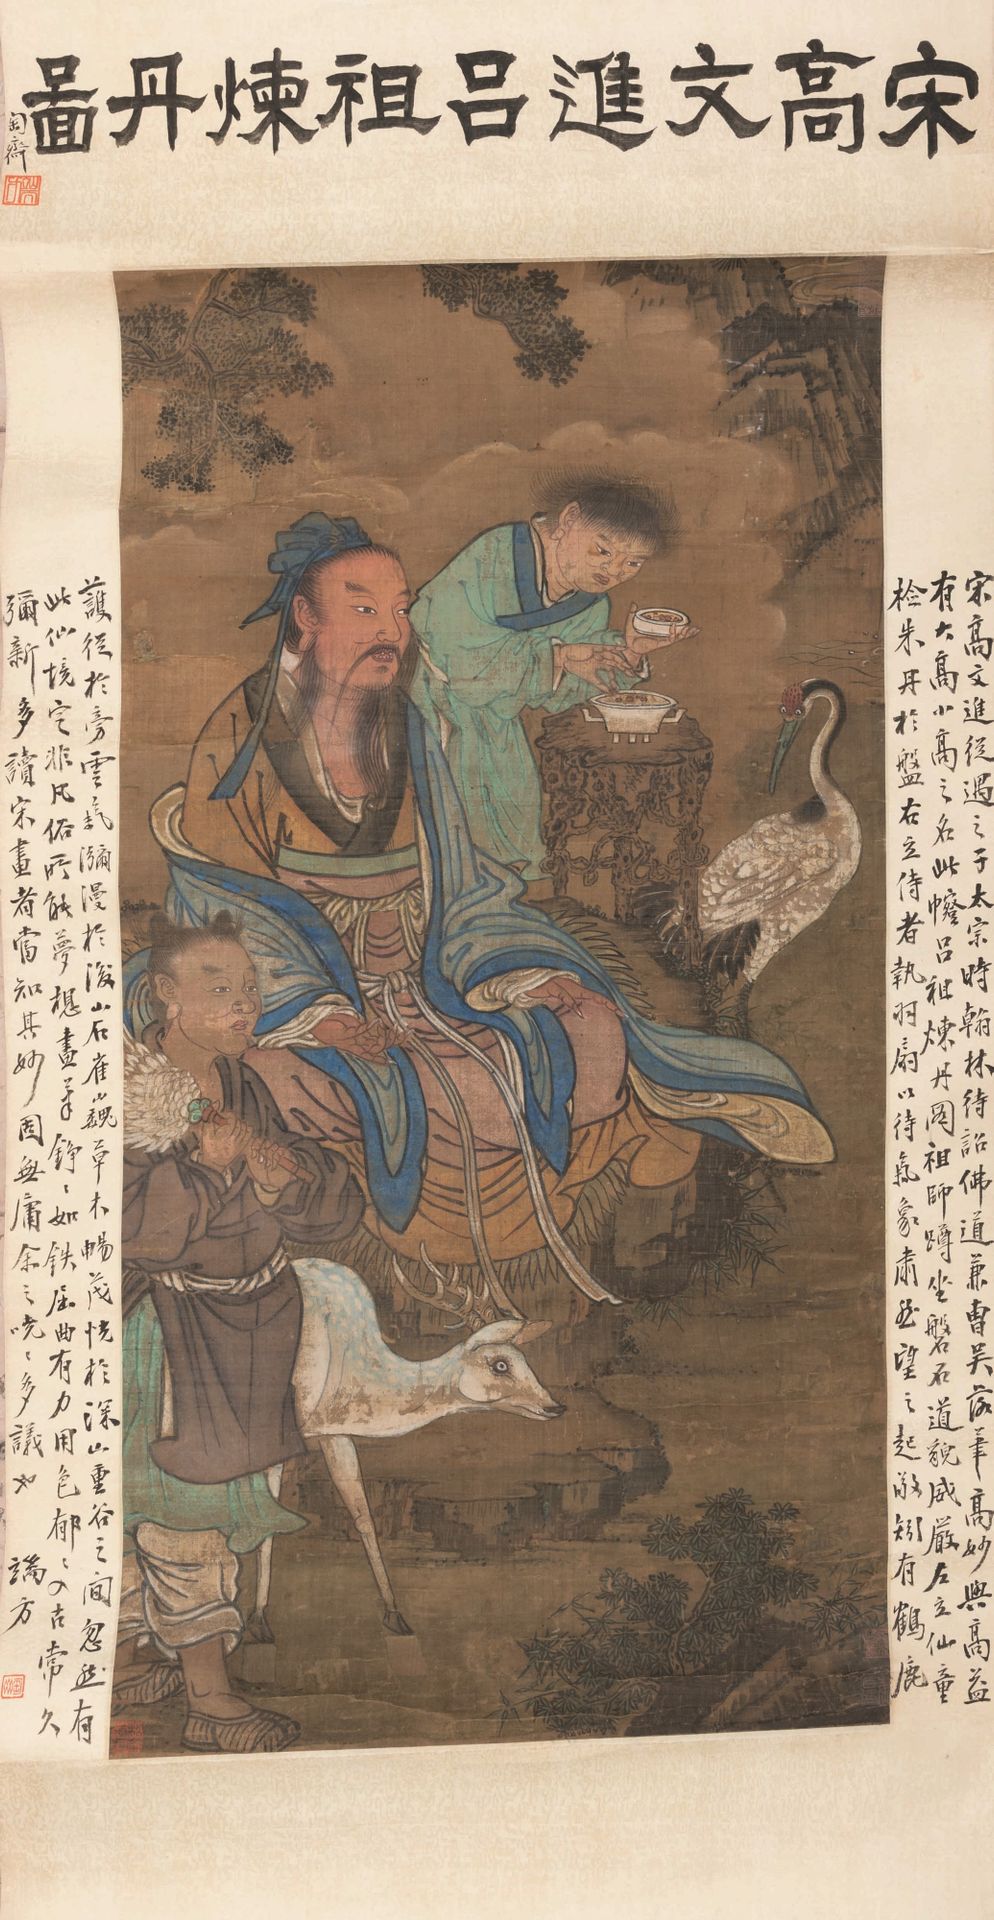 A painting on silk, China, Qing Dynasty 1800s, W. 48,5 - H. 93 Cm